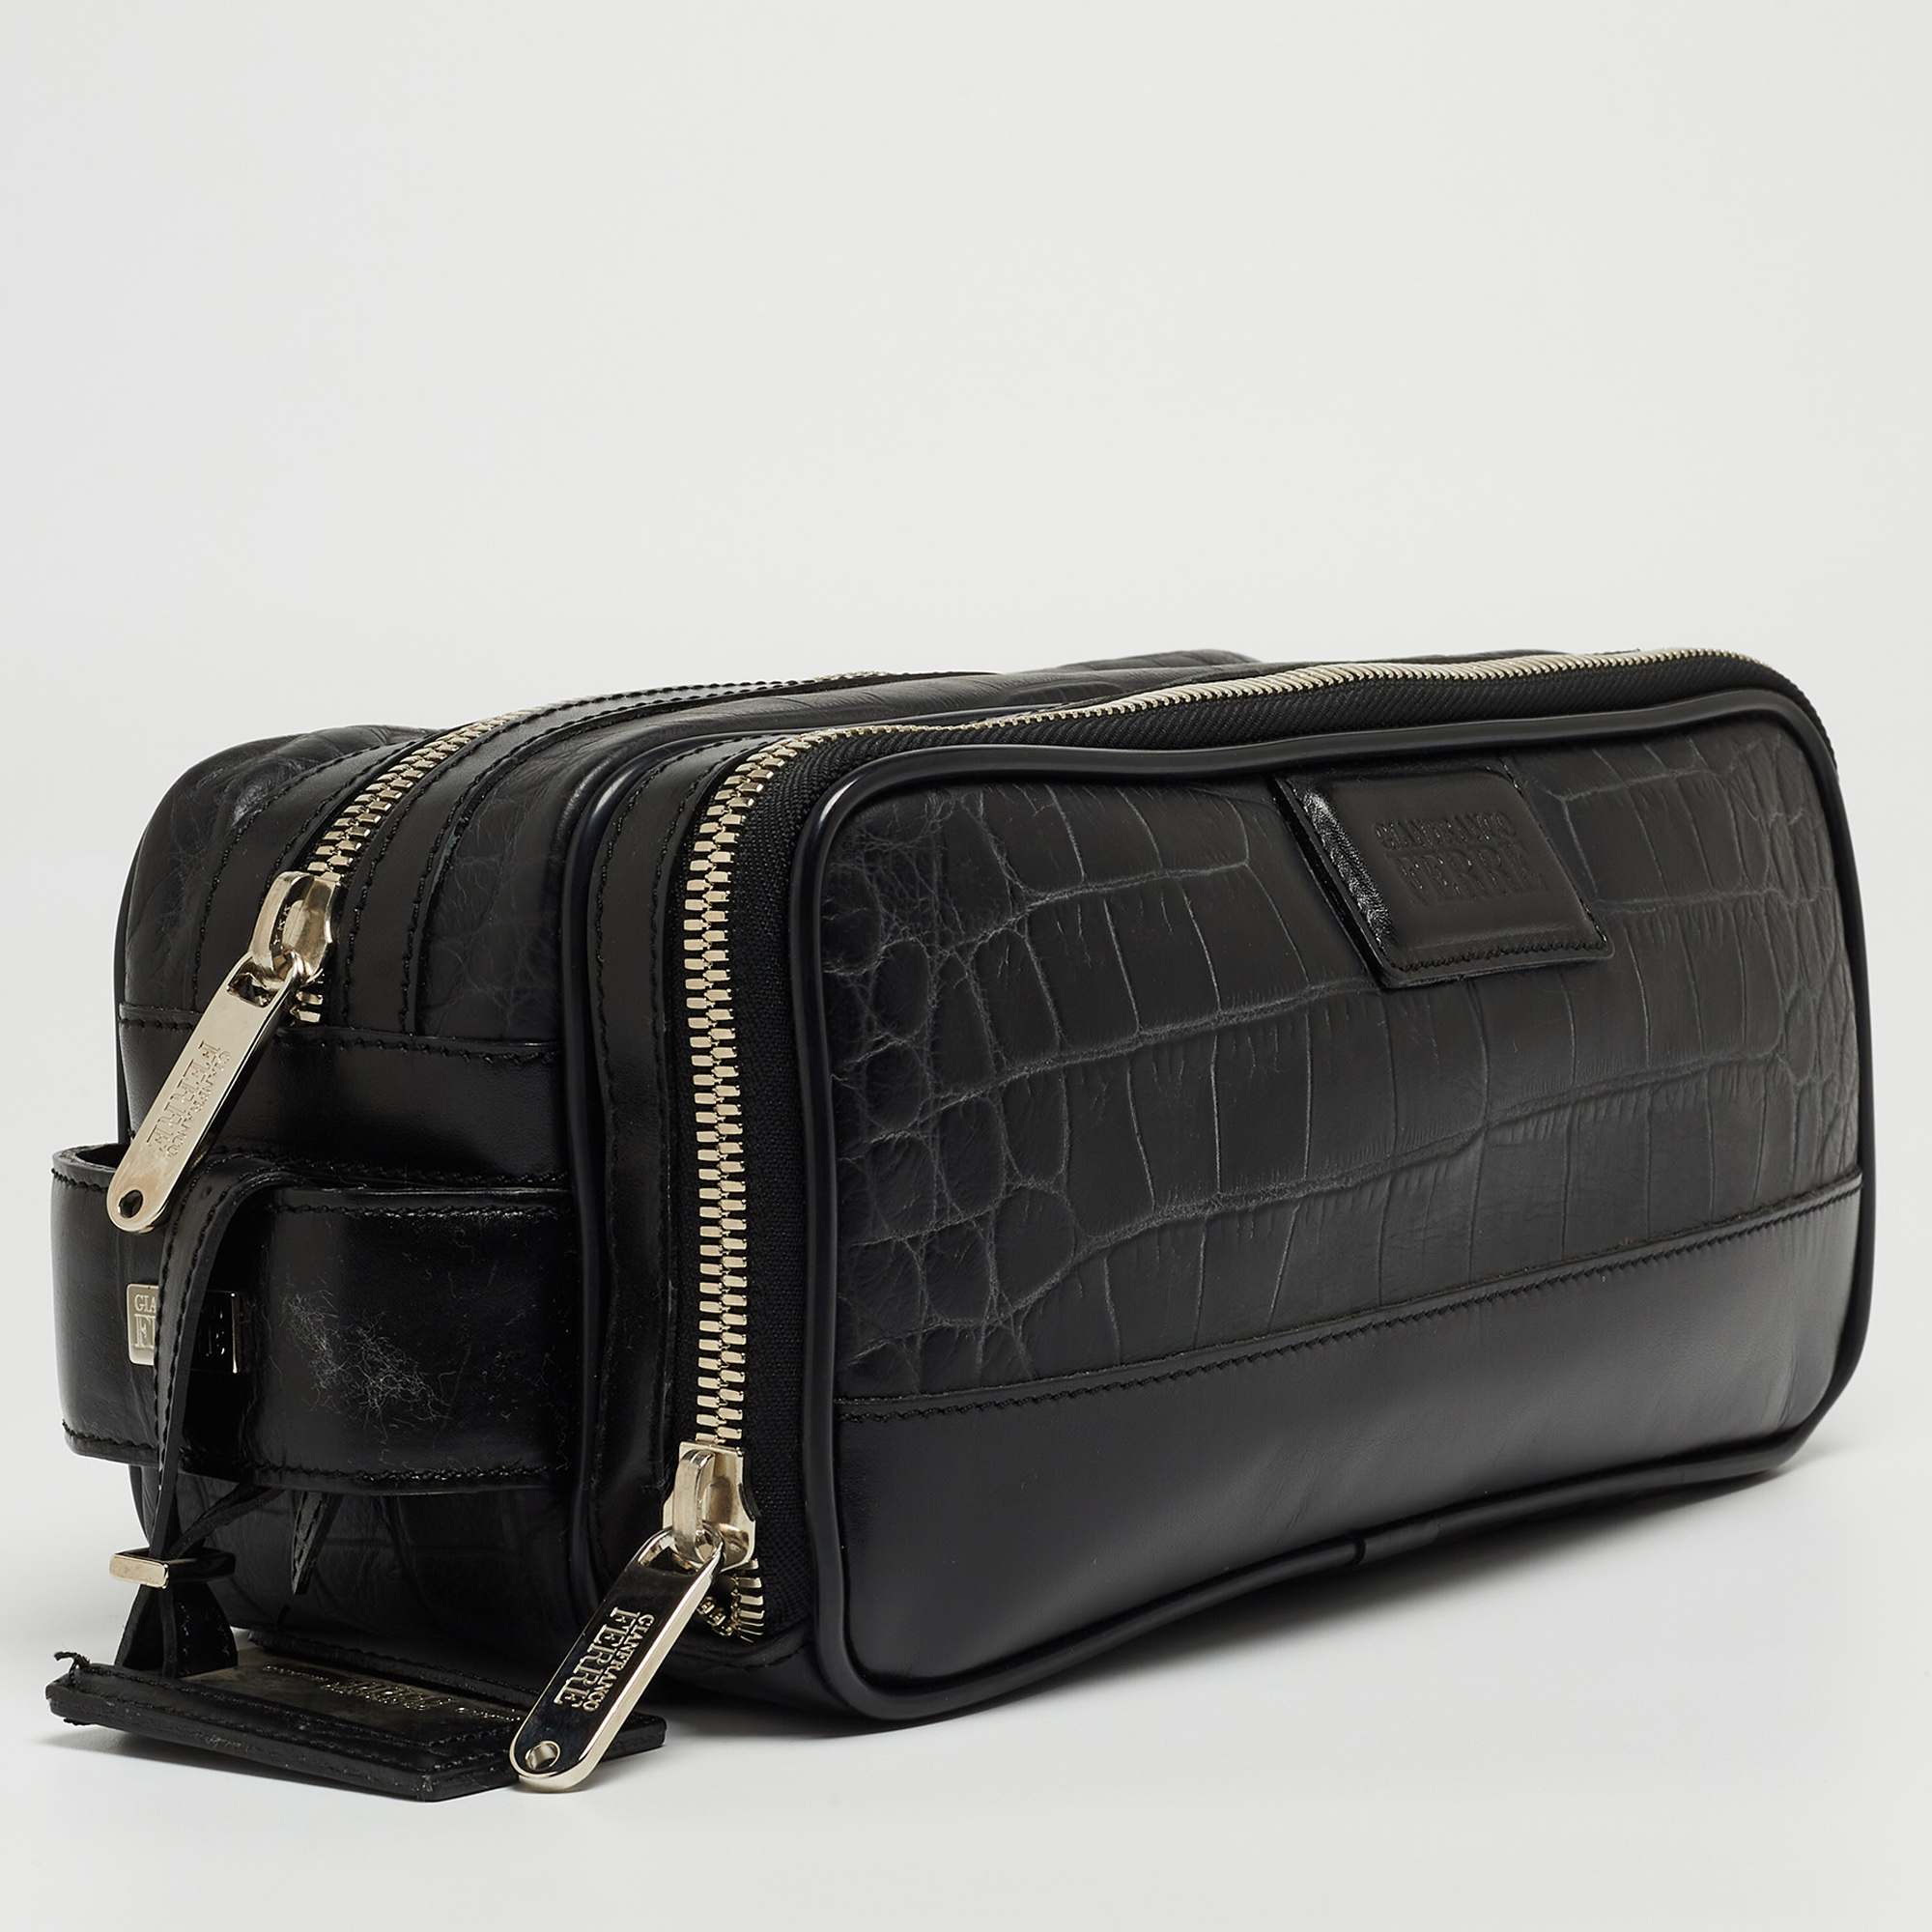 Gianfranco Ferre Black Croc Embossed Leather Oversized Pouch